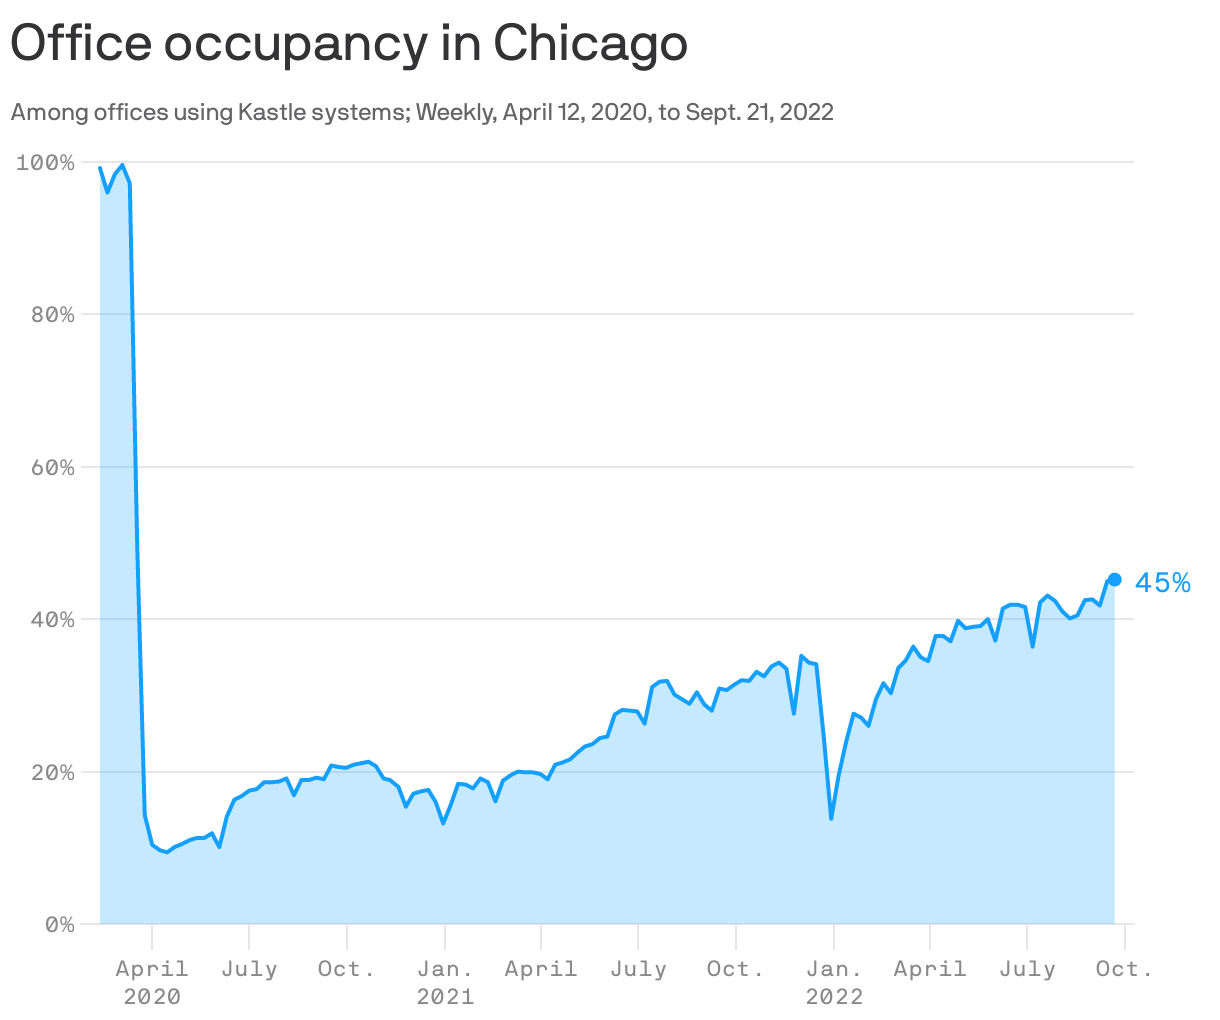 Office occupancy in Chicago